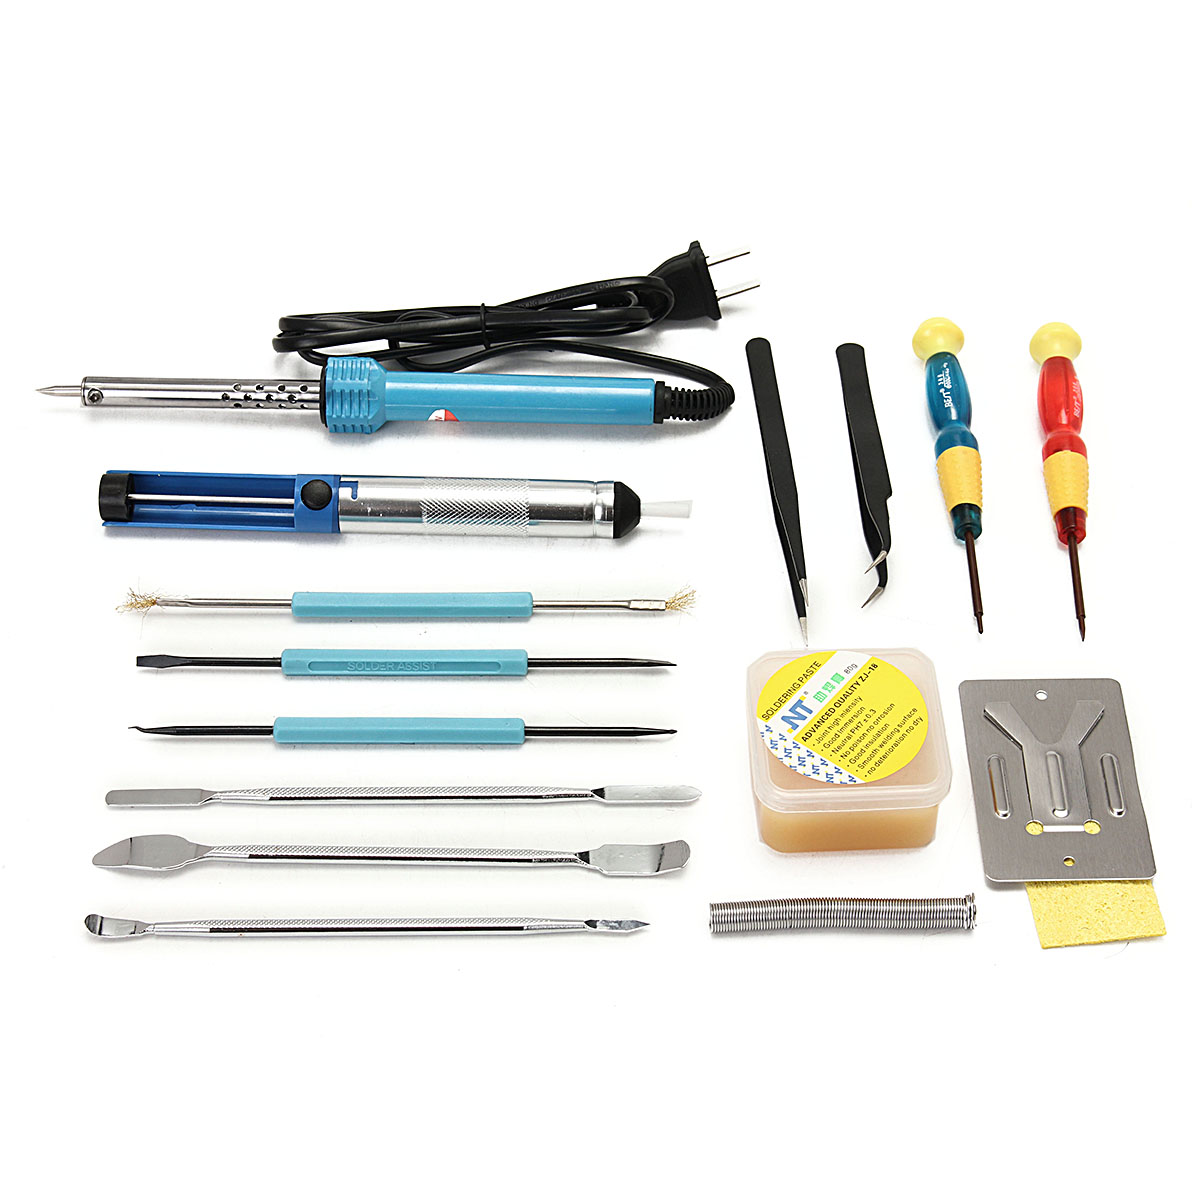 17in1-Electric-Soldering-Tools-Kit-Set-Iron-Stand-Desoldering-Pump-30W-110V-1300343-2